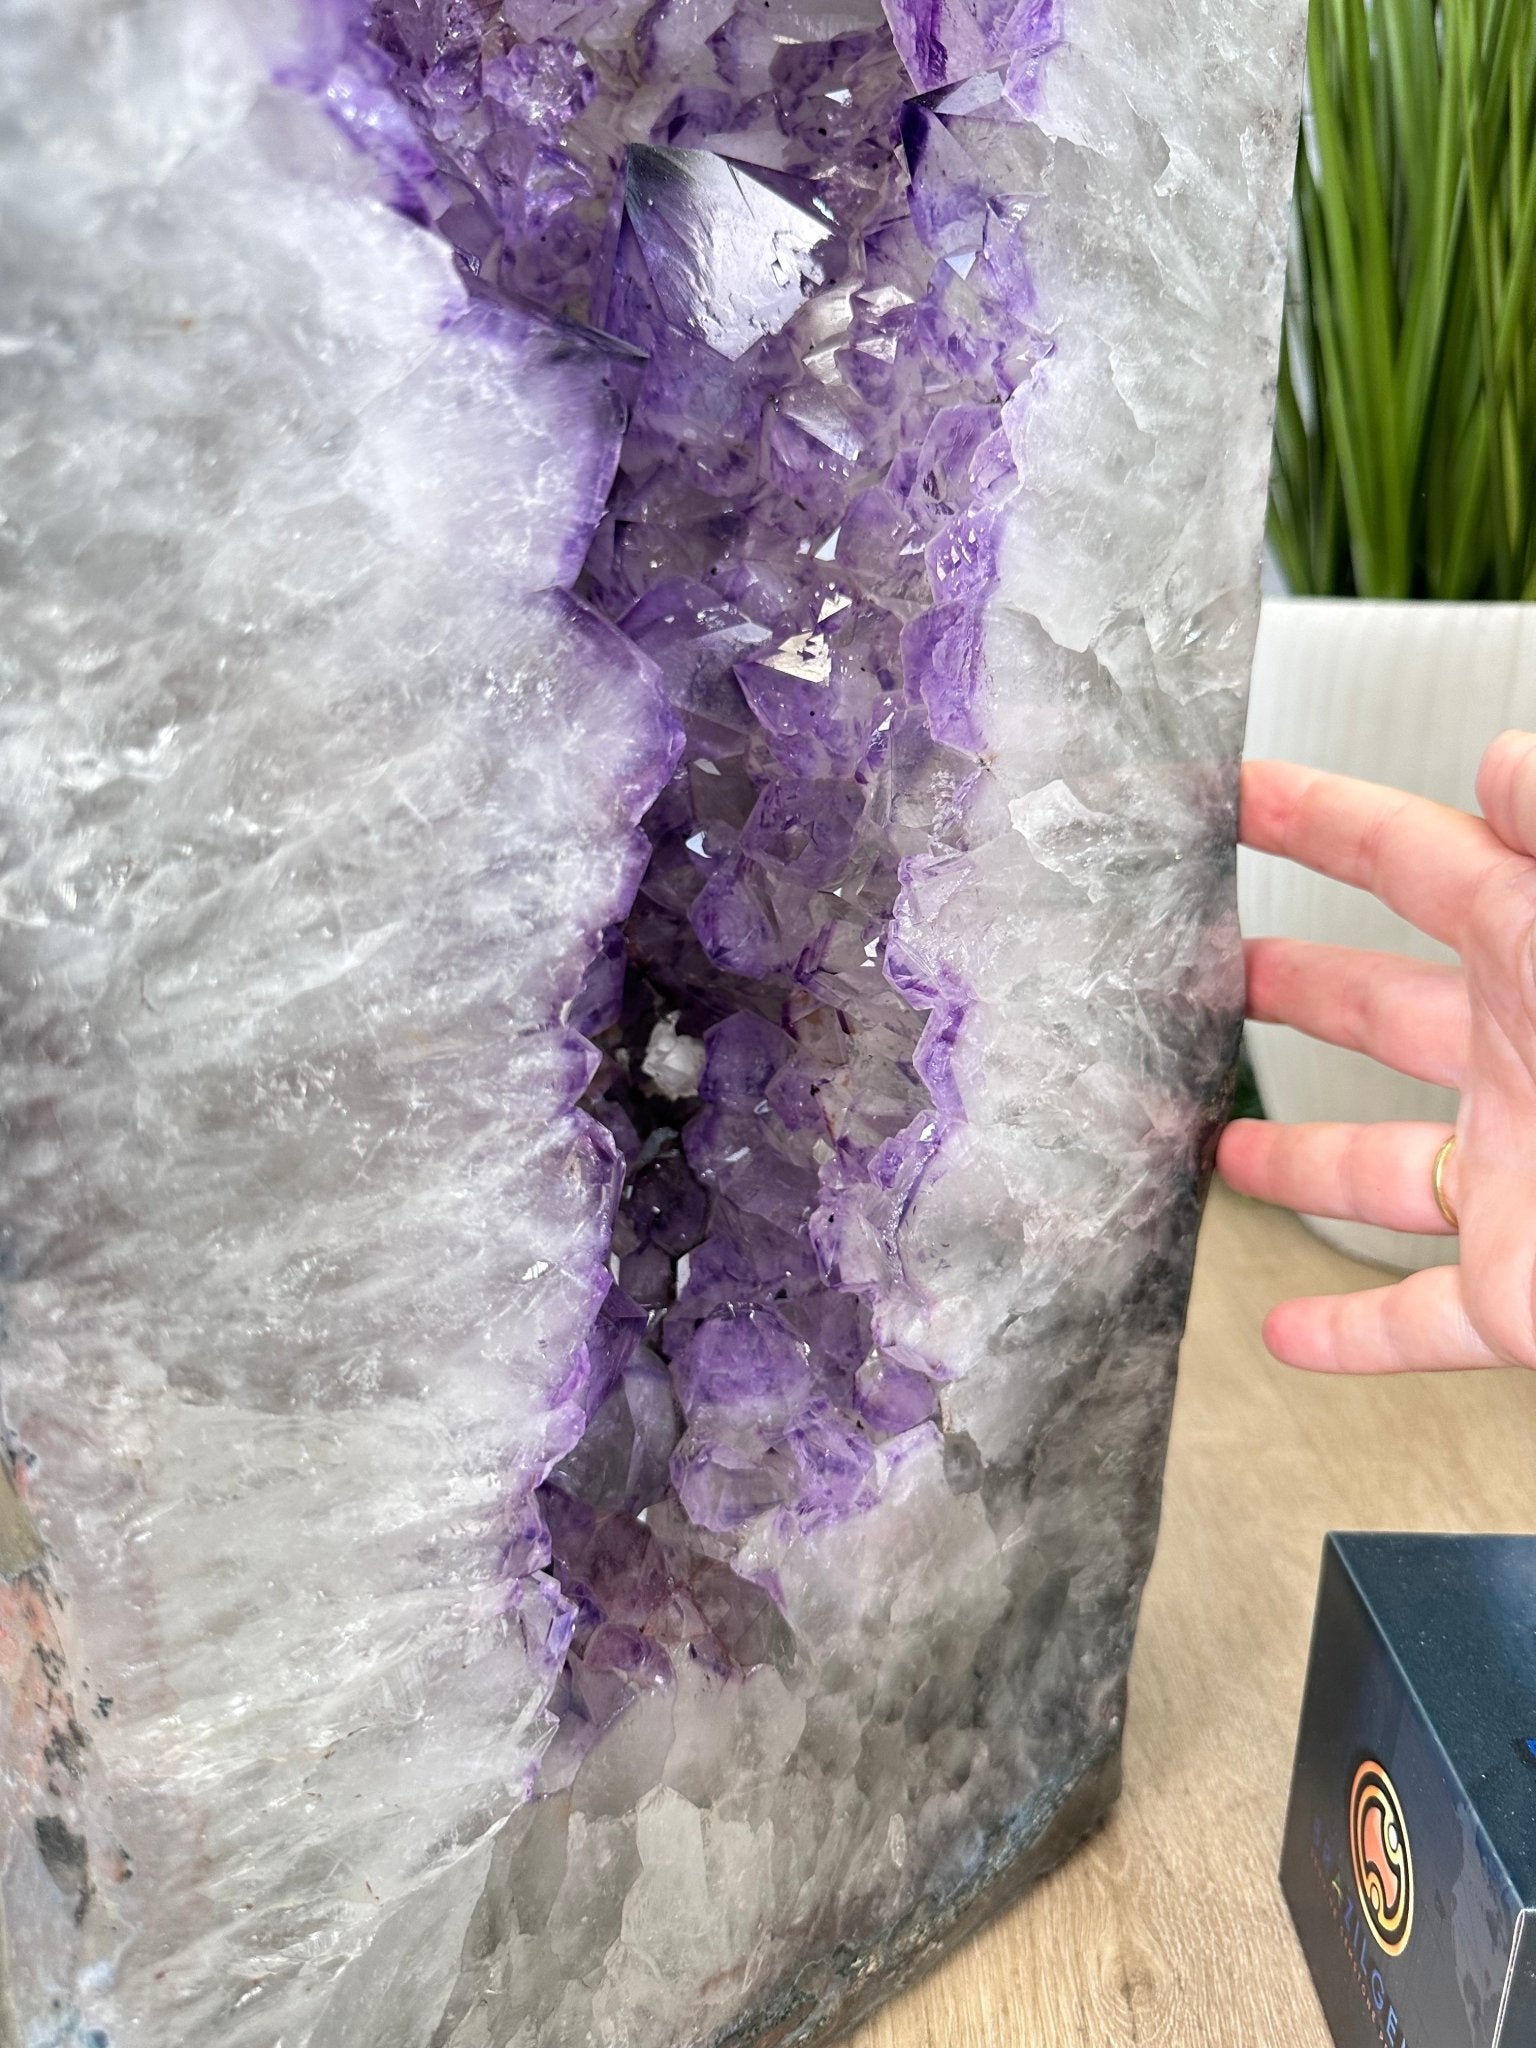 Extra Plus Quality Polished Brazilian Amethyst Cathedral, 148.2 lbs & 37.5" tall Model #5602-0183 by Brazil Gems - Brazil GemsBrazil GemsExtra Plus Quality Polished Brazilian Amethyst Cathedral, 148.2 lbs & 37.5" tall Model #5602-0183 by Brazil GemsPolished Cathedrals5602-0183